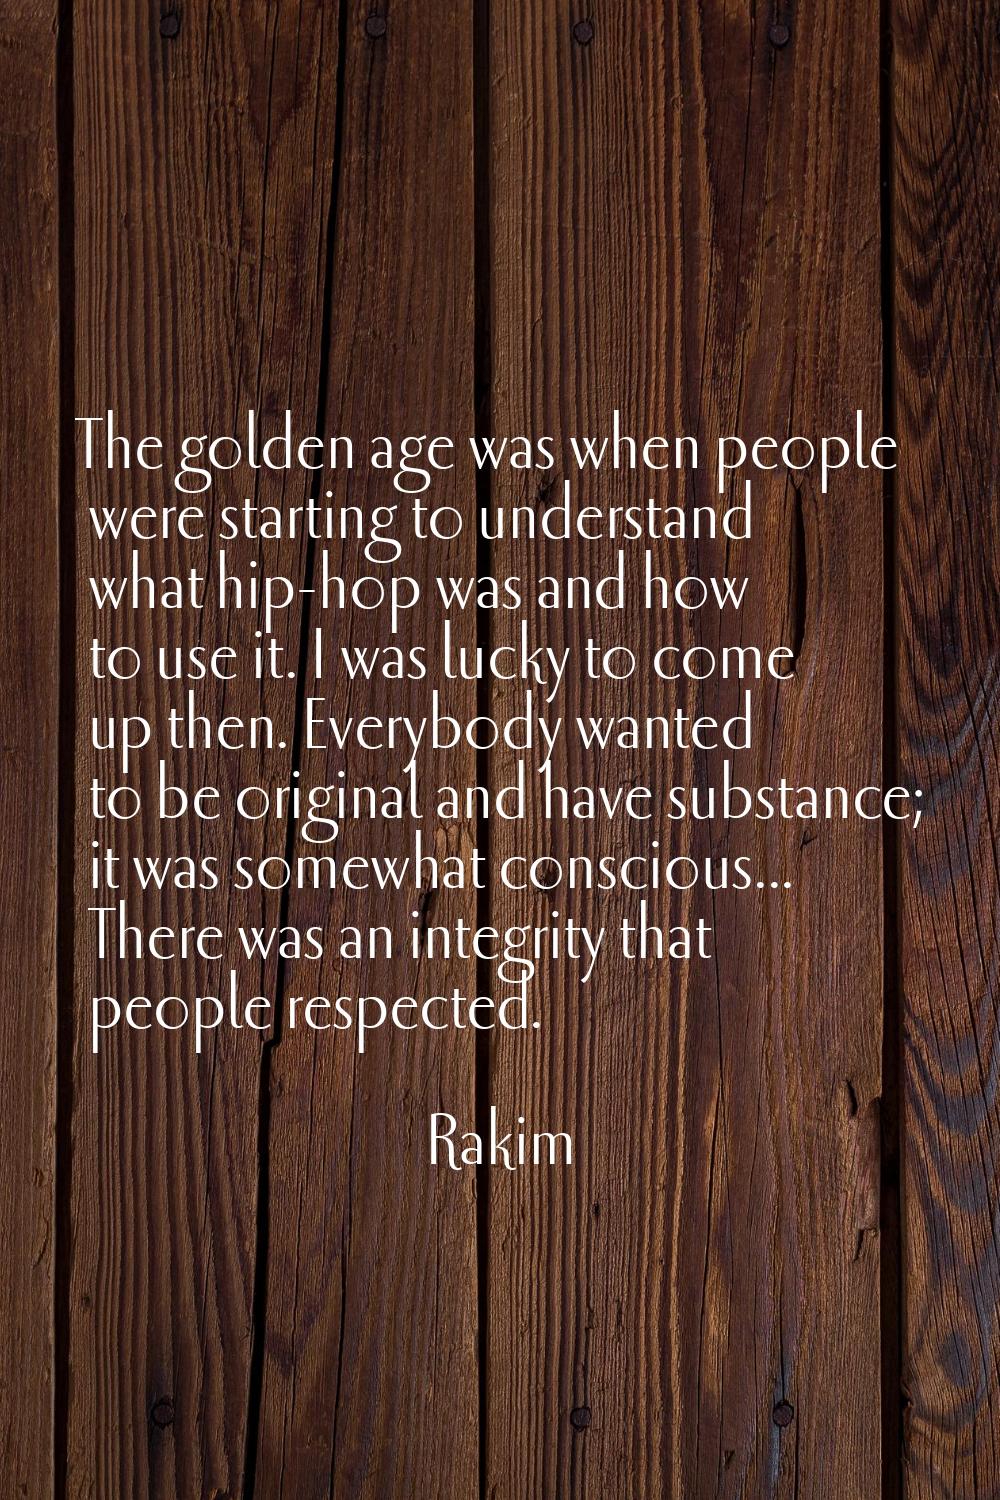 The golden age was when people were starting to understand what hip-hop was and how to use it. I wa